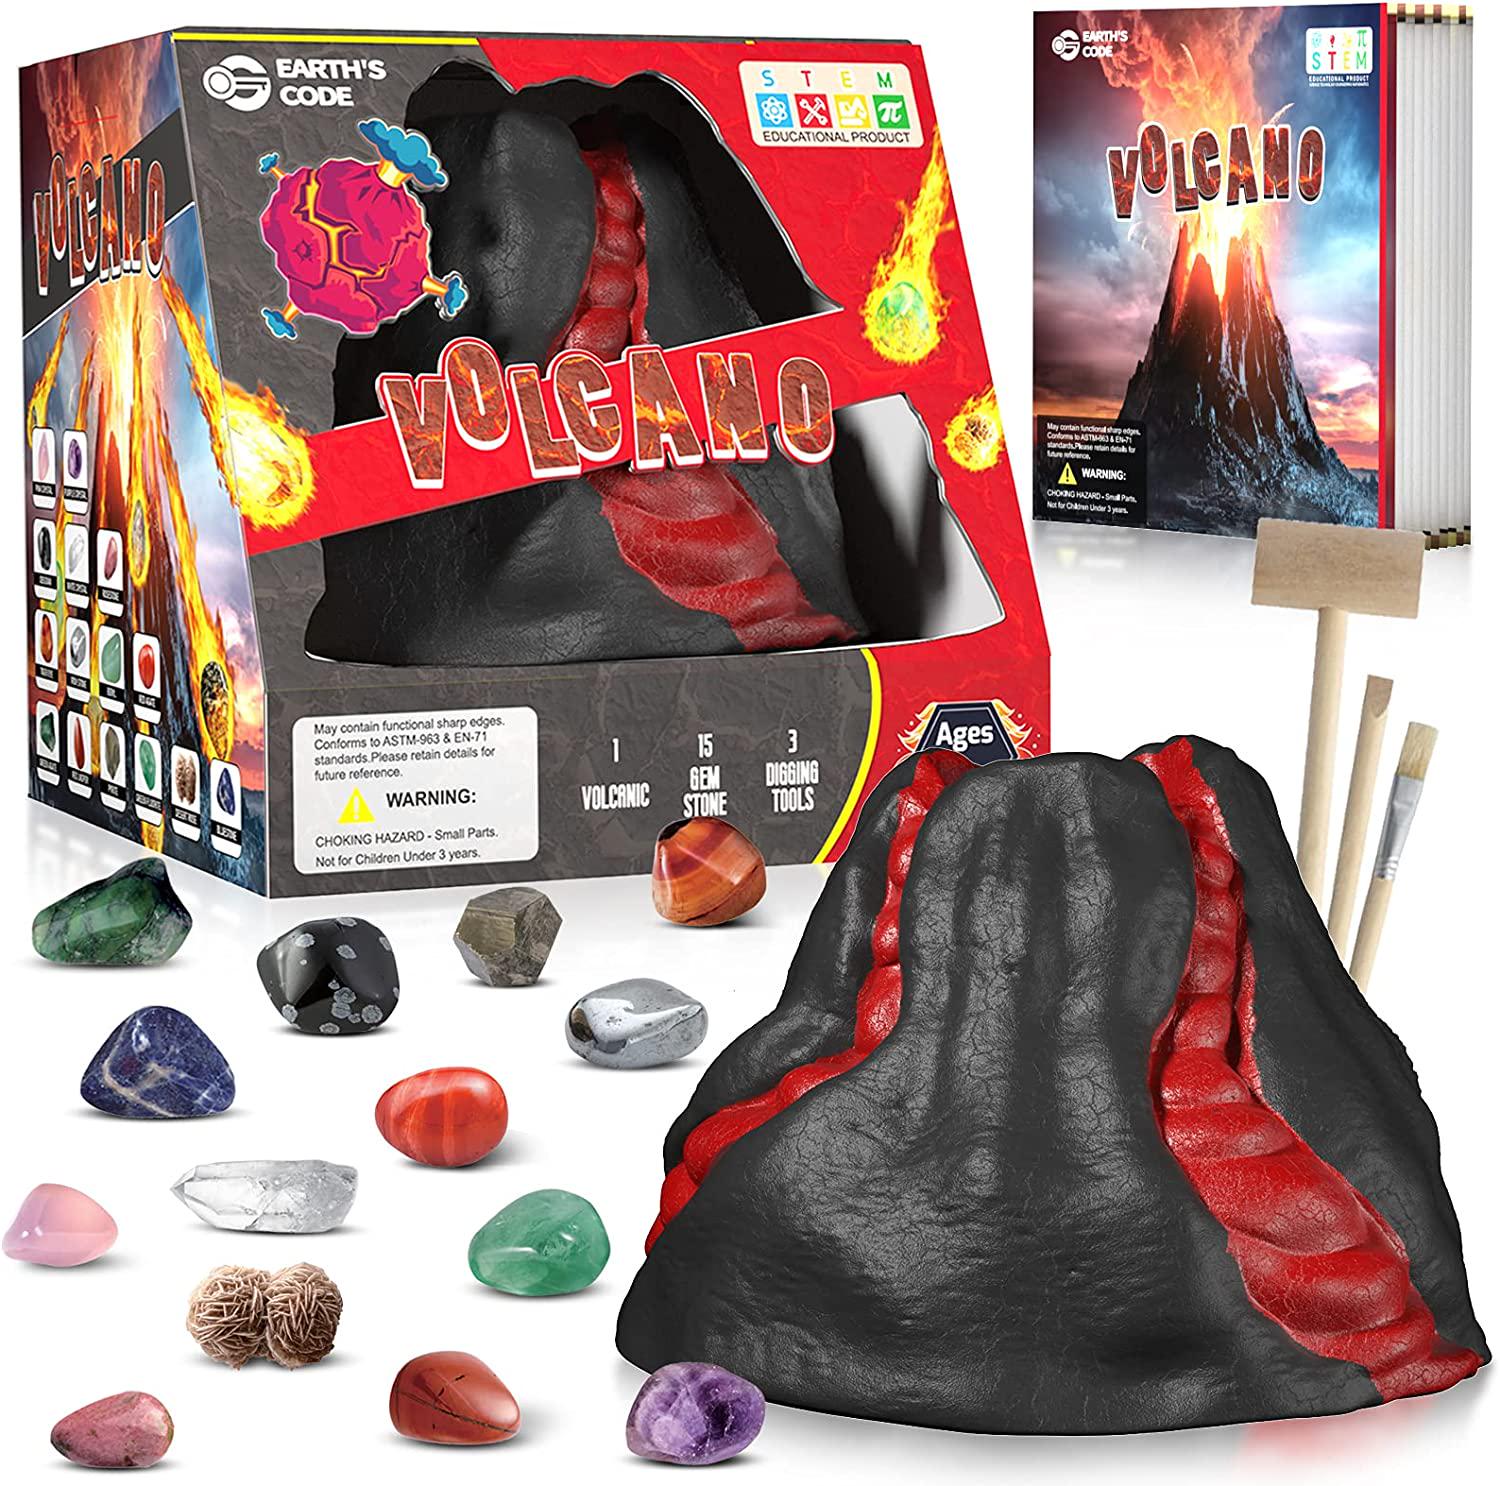 EARTH'SCODE, Mega Gemstone Dig Kit - Dig up 15 Real Gemstones, Rocks Collection Kit, Volcanic Minerals Dig Kit Kids Activities STEM Science and Educational Toys Gift for Boys, Girls 3-5,5-7,7-12 Year Old